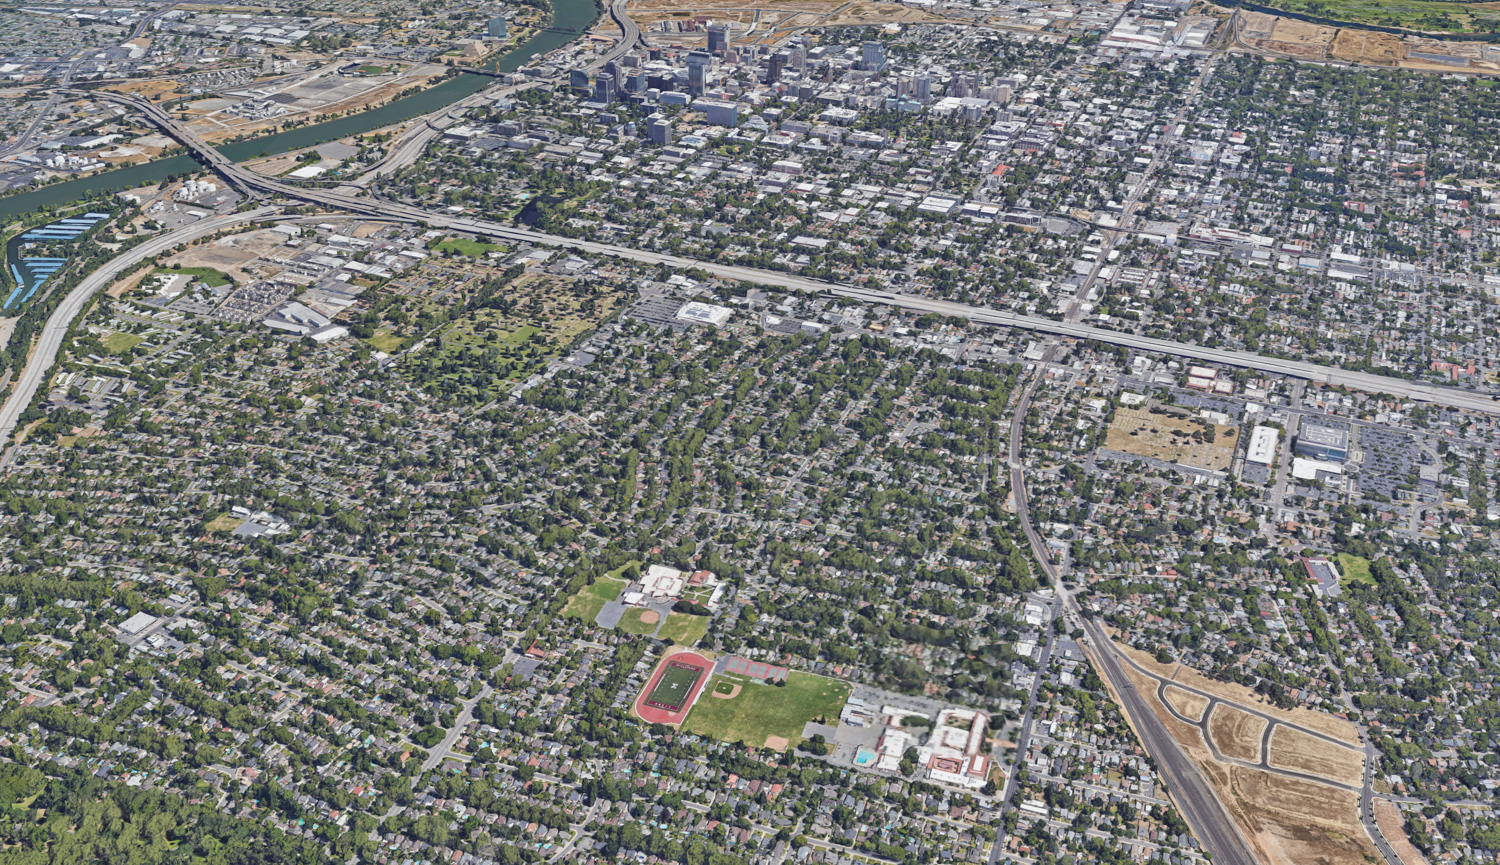 The Land Park neighborhood, a single-family zoned neighborhood separated from Downtown Sacramento by a wide-laned freeway specifically mentioned by the city Mayor, image via Google Street View